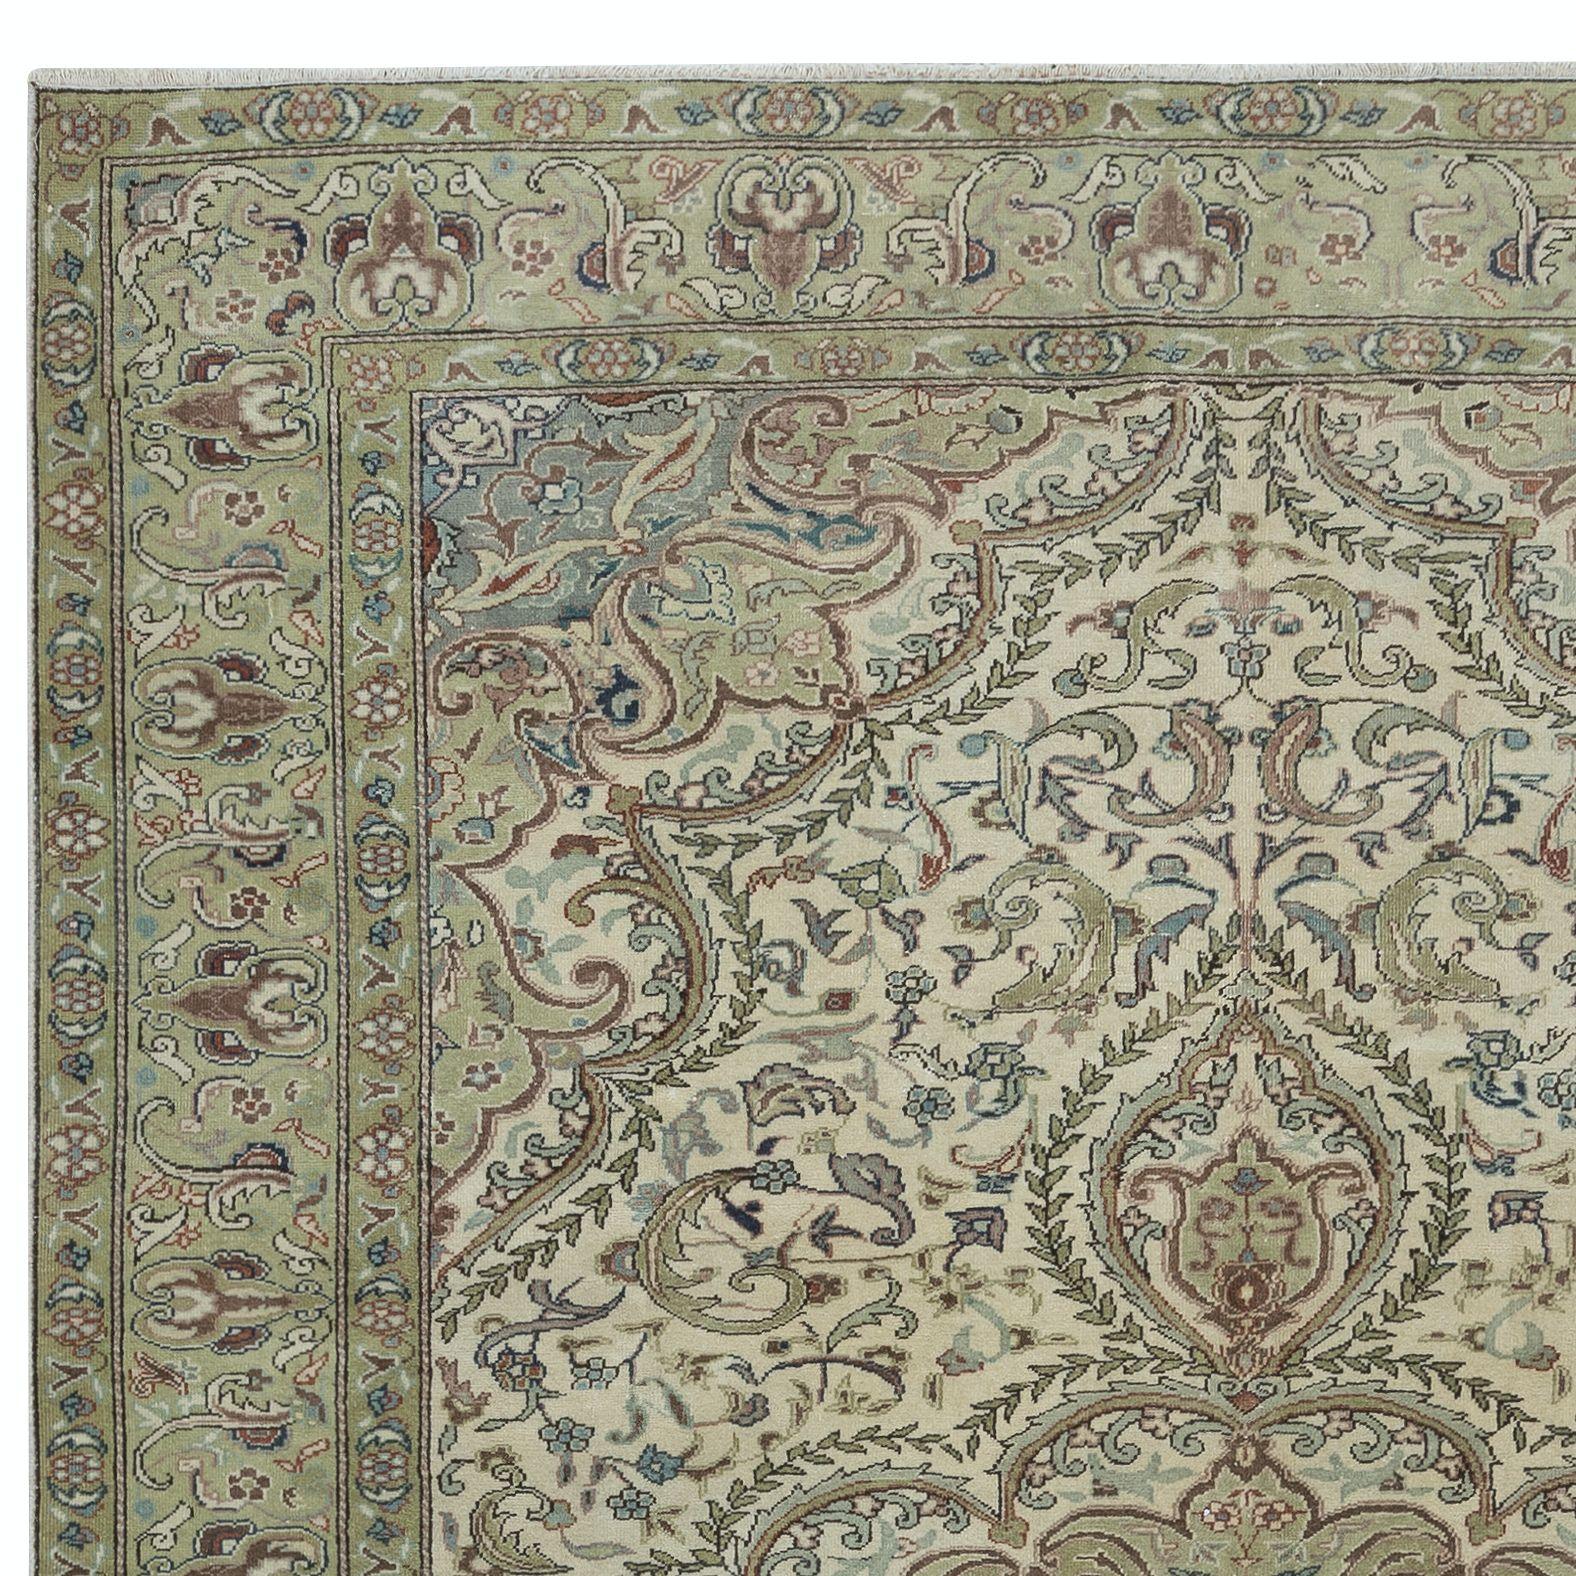 Hand-Knotted 6.4x9.8 Ft Traditional Handmade Turkish Medallion Design Rug in Green Tones For Sale